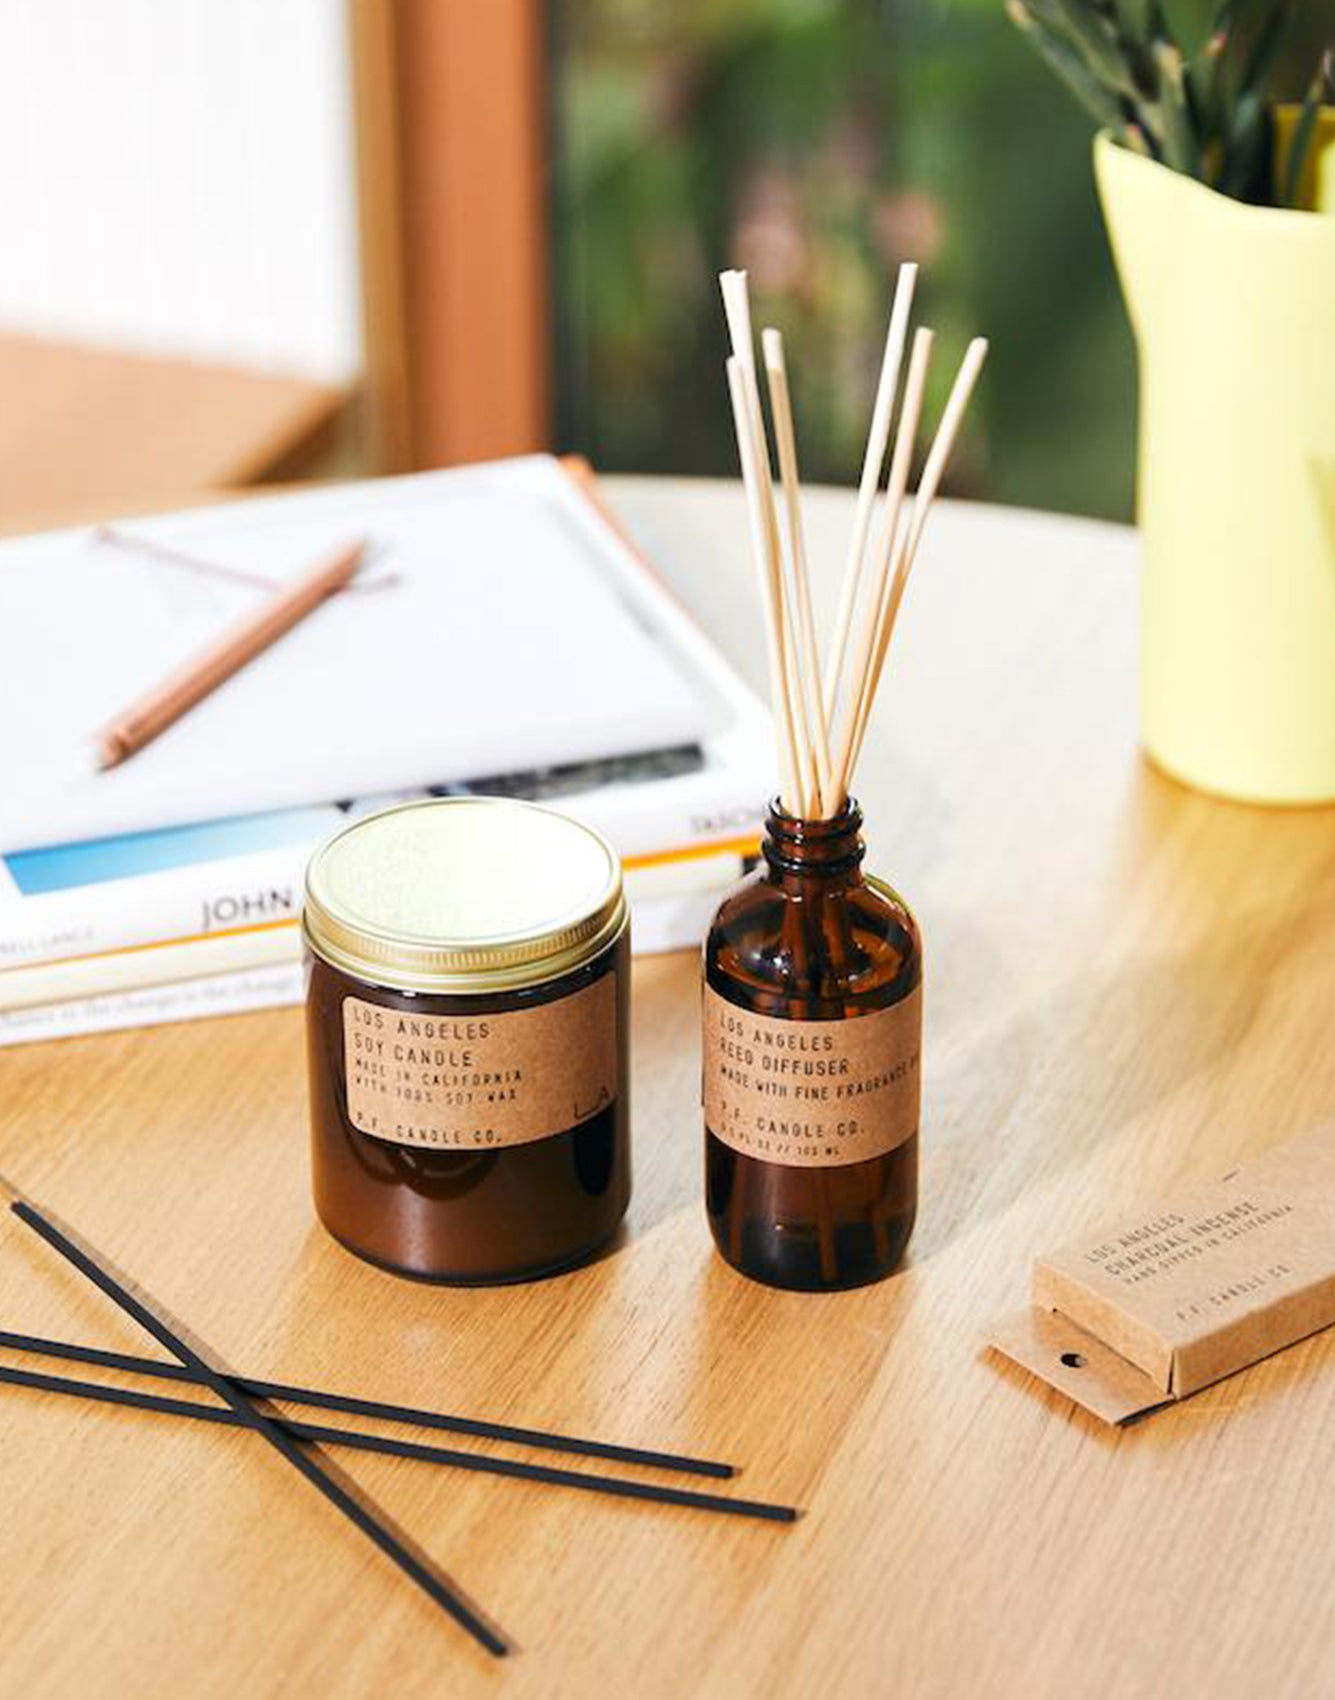 P.F. Candle Co. Los Angeles– Incense Sticks